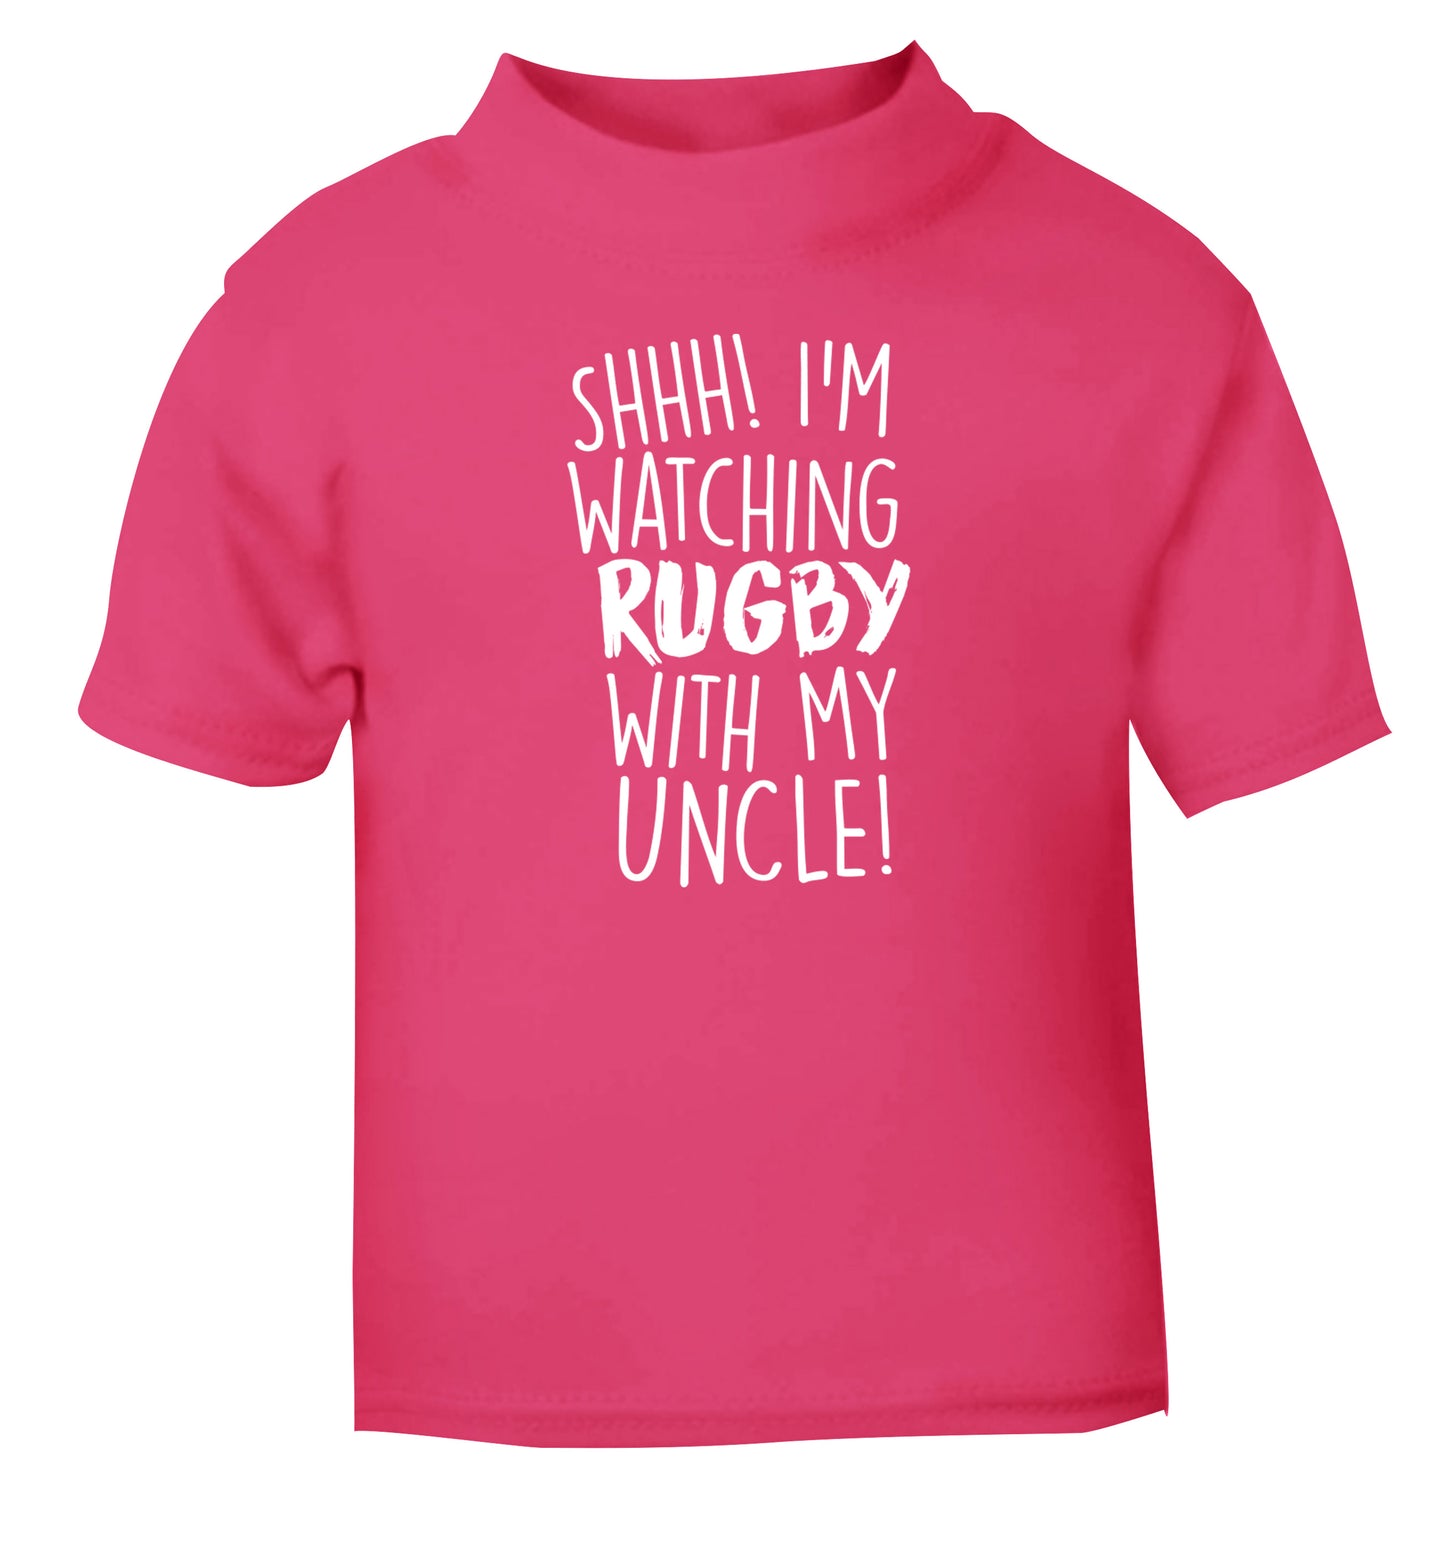 Shh.. I'm watching rugby with my uncle pink Baby Toddler Tshirt 2 Years